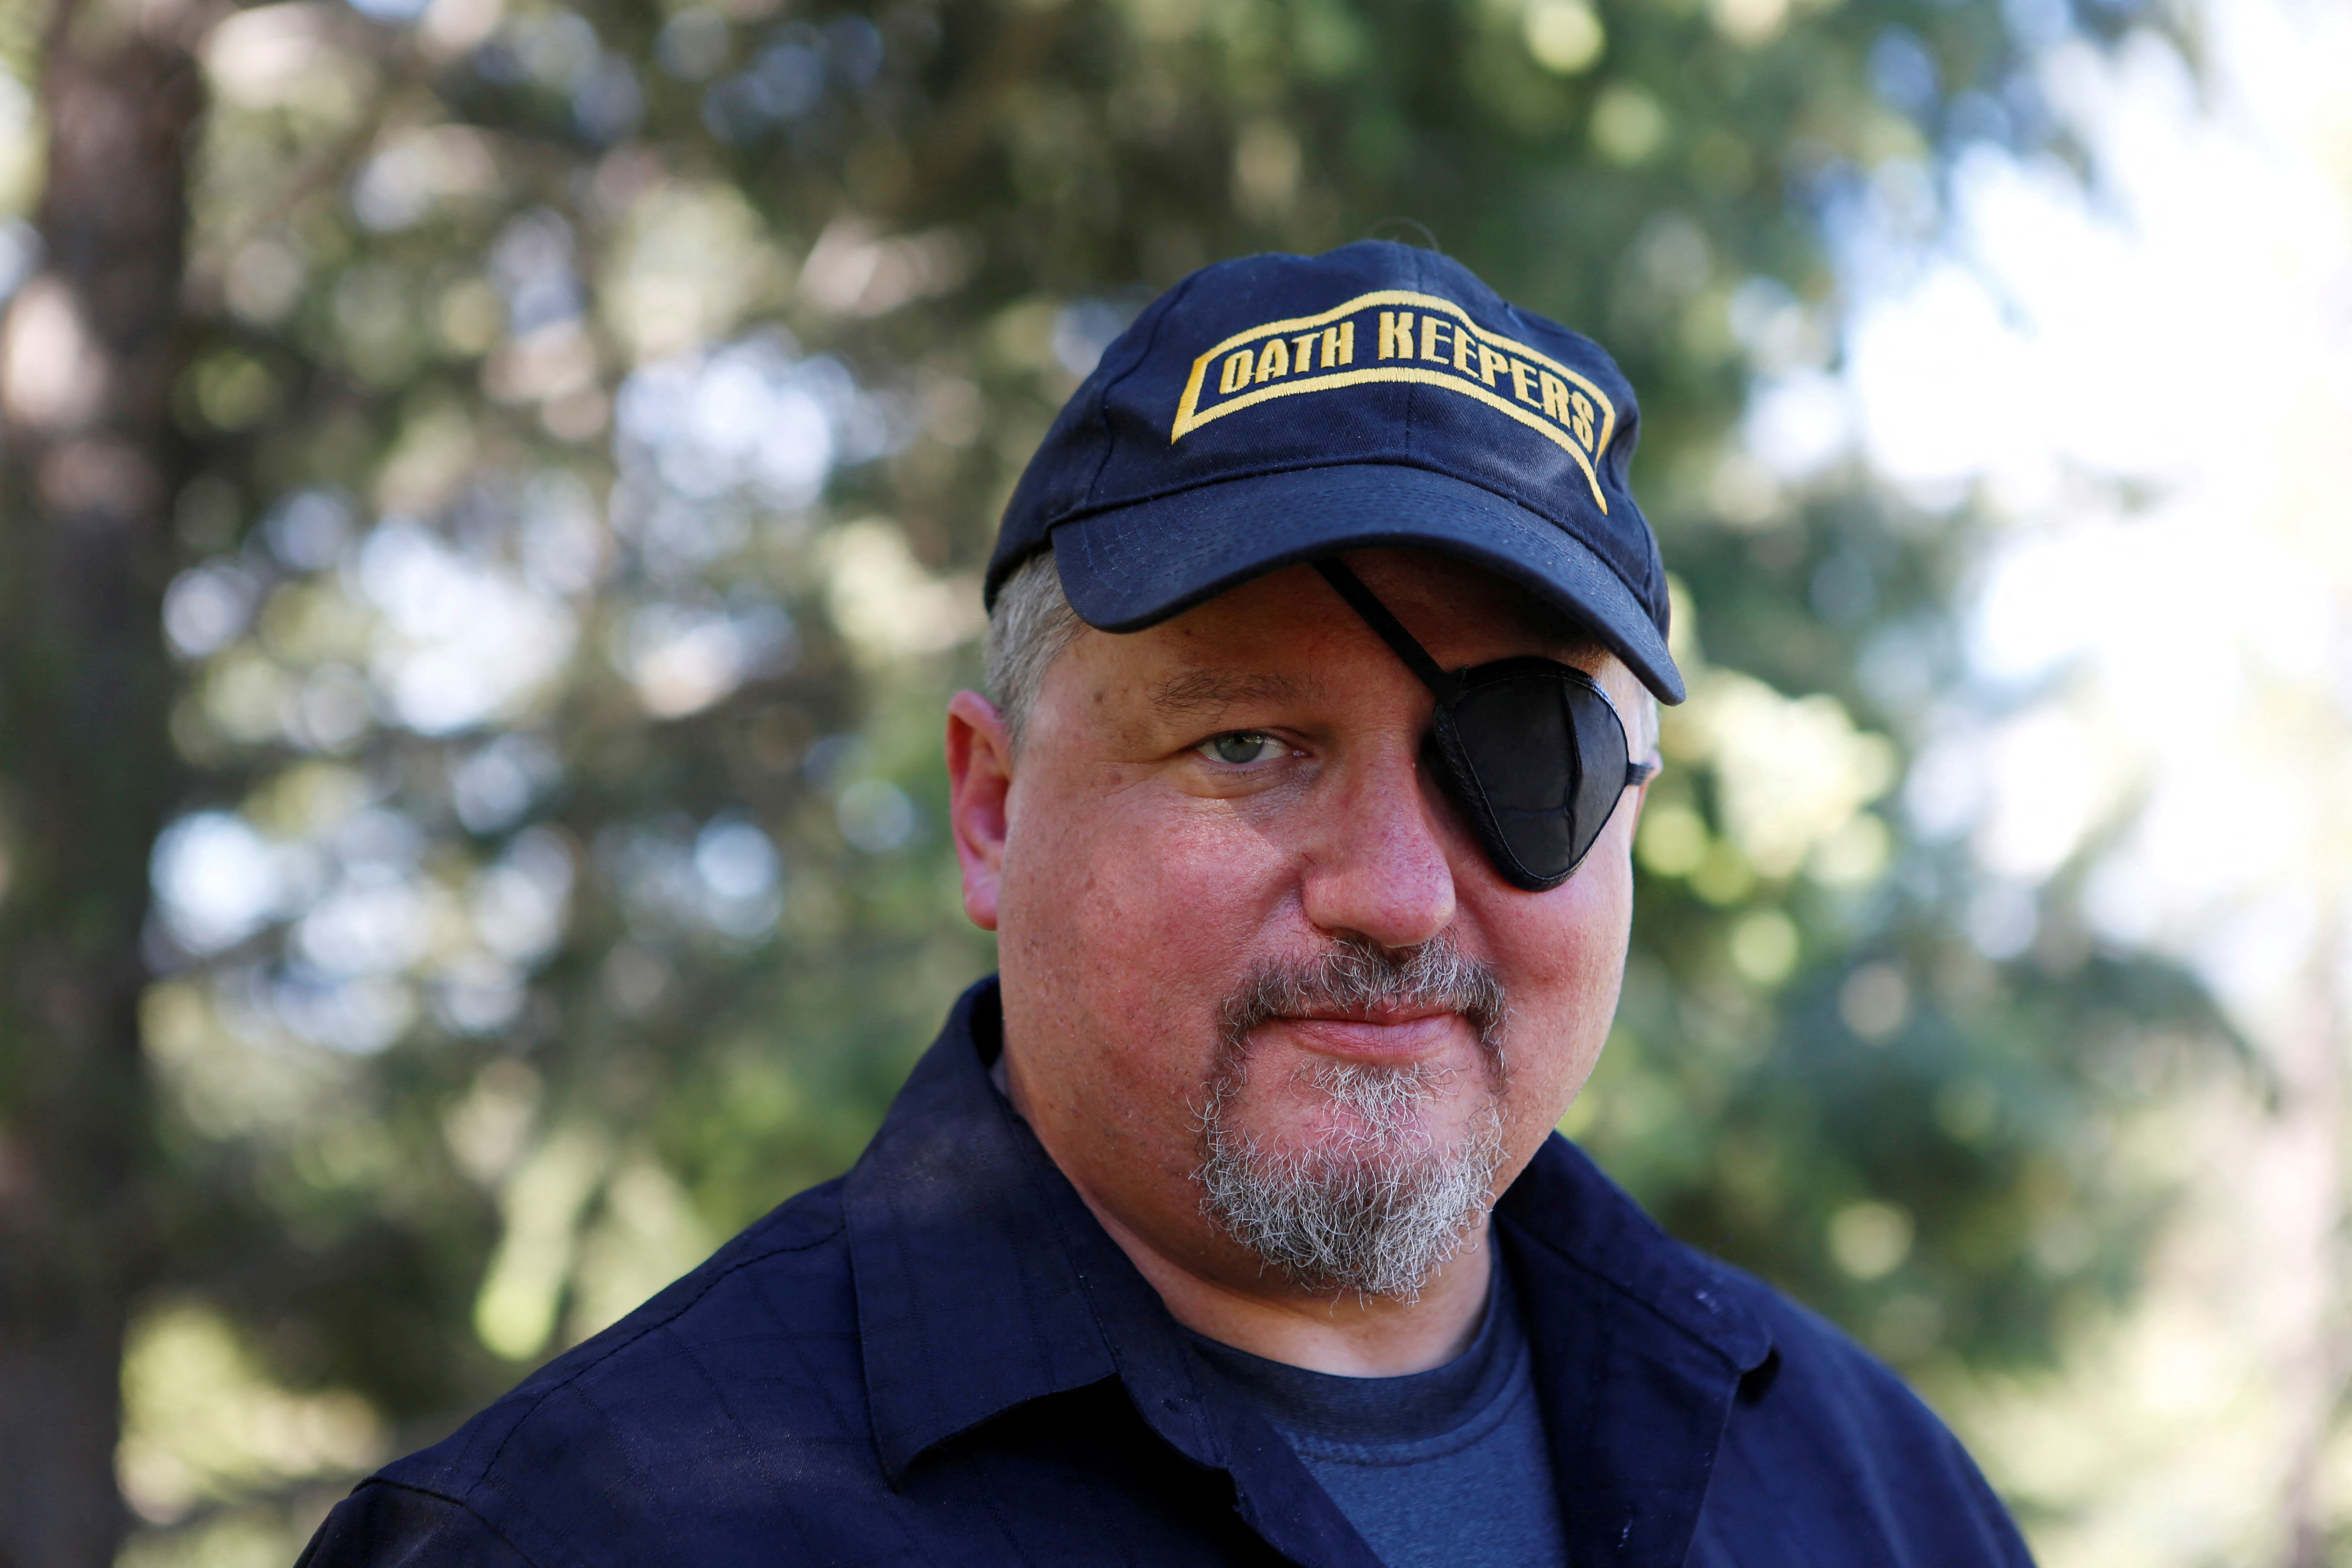 Stewart Rhodes of Oath Keepers poses during an interview session in Eureka